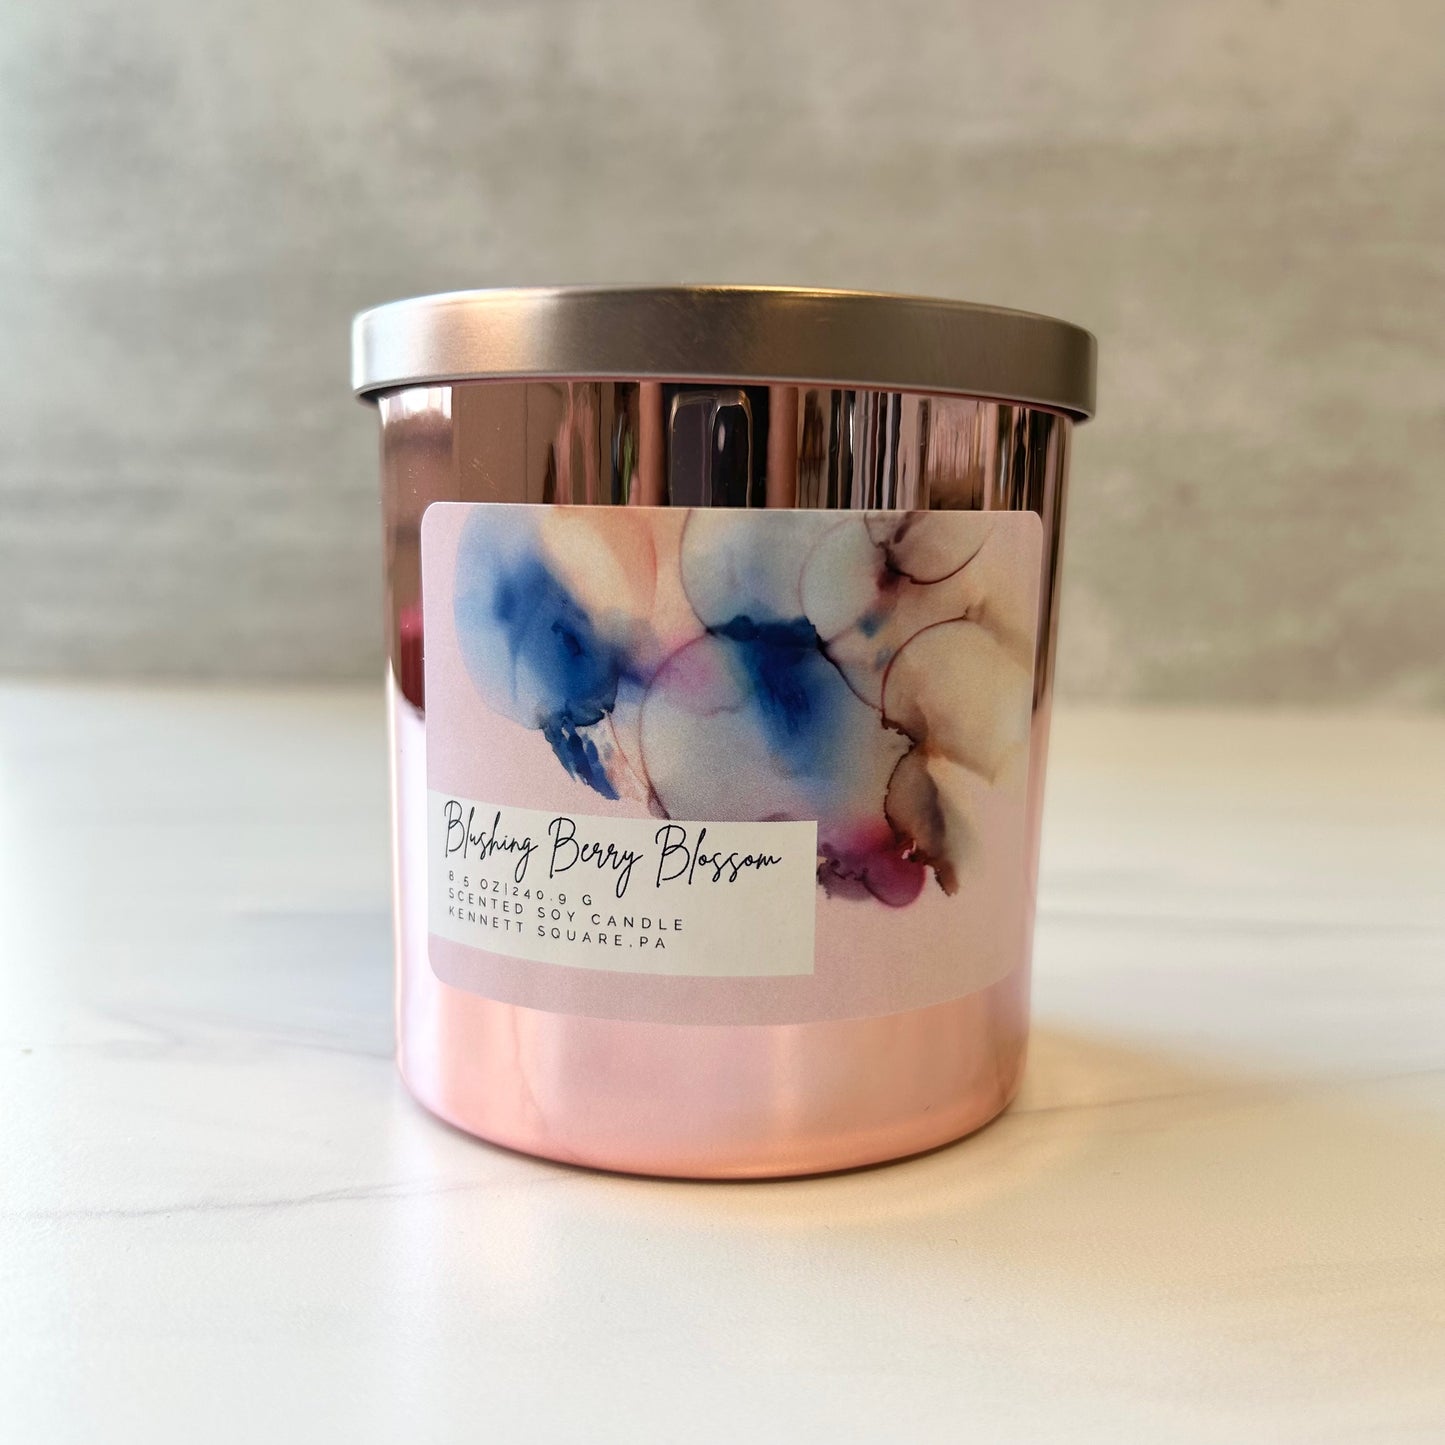 Blushing Berry Blossom Soy Candle - Limited Edition